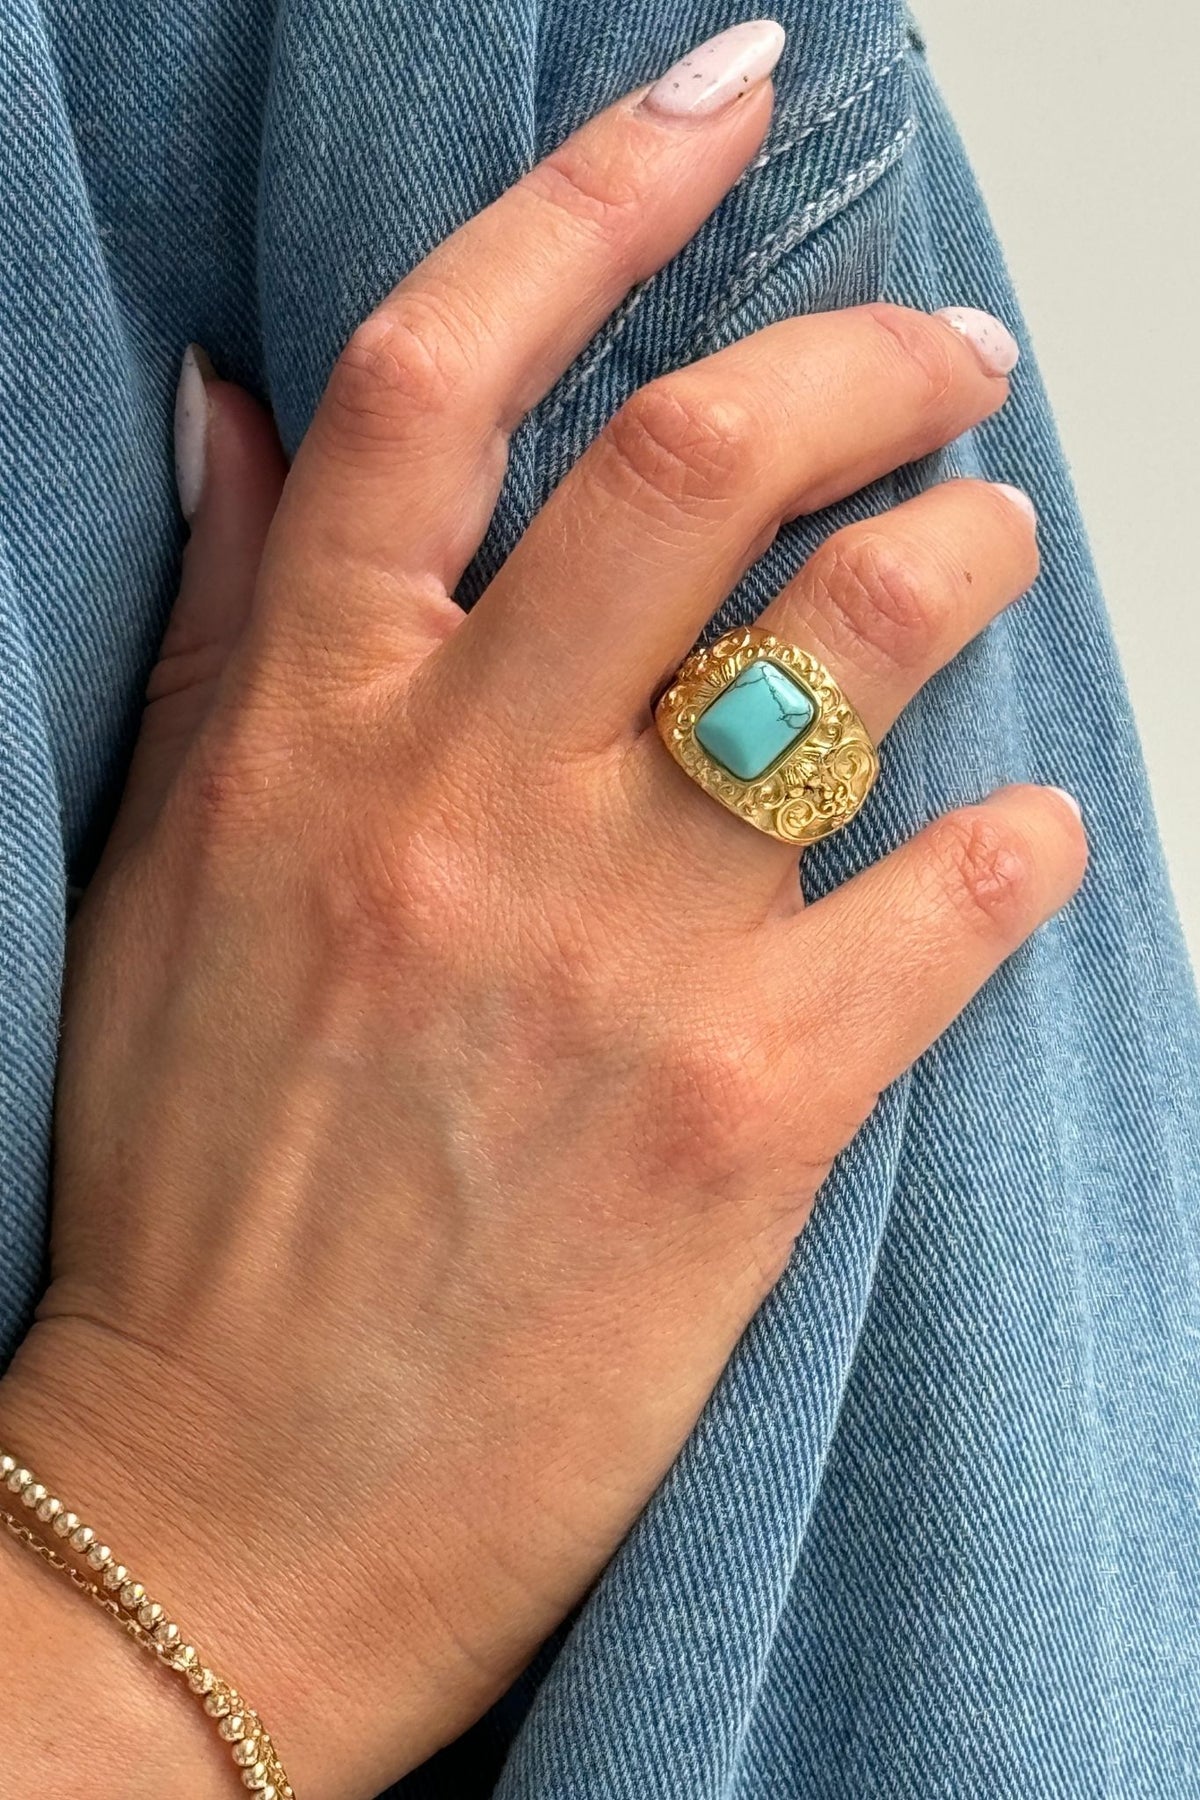 Olive Turquoise Ring In Gold